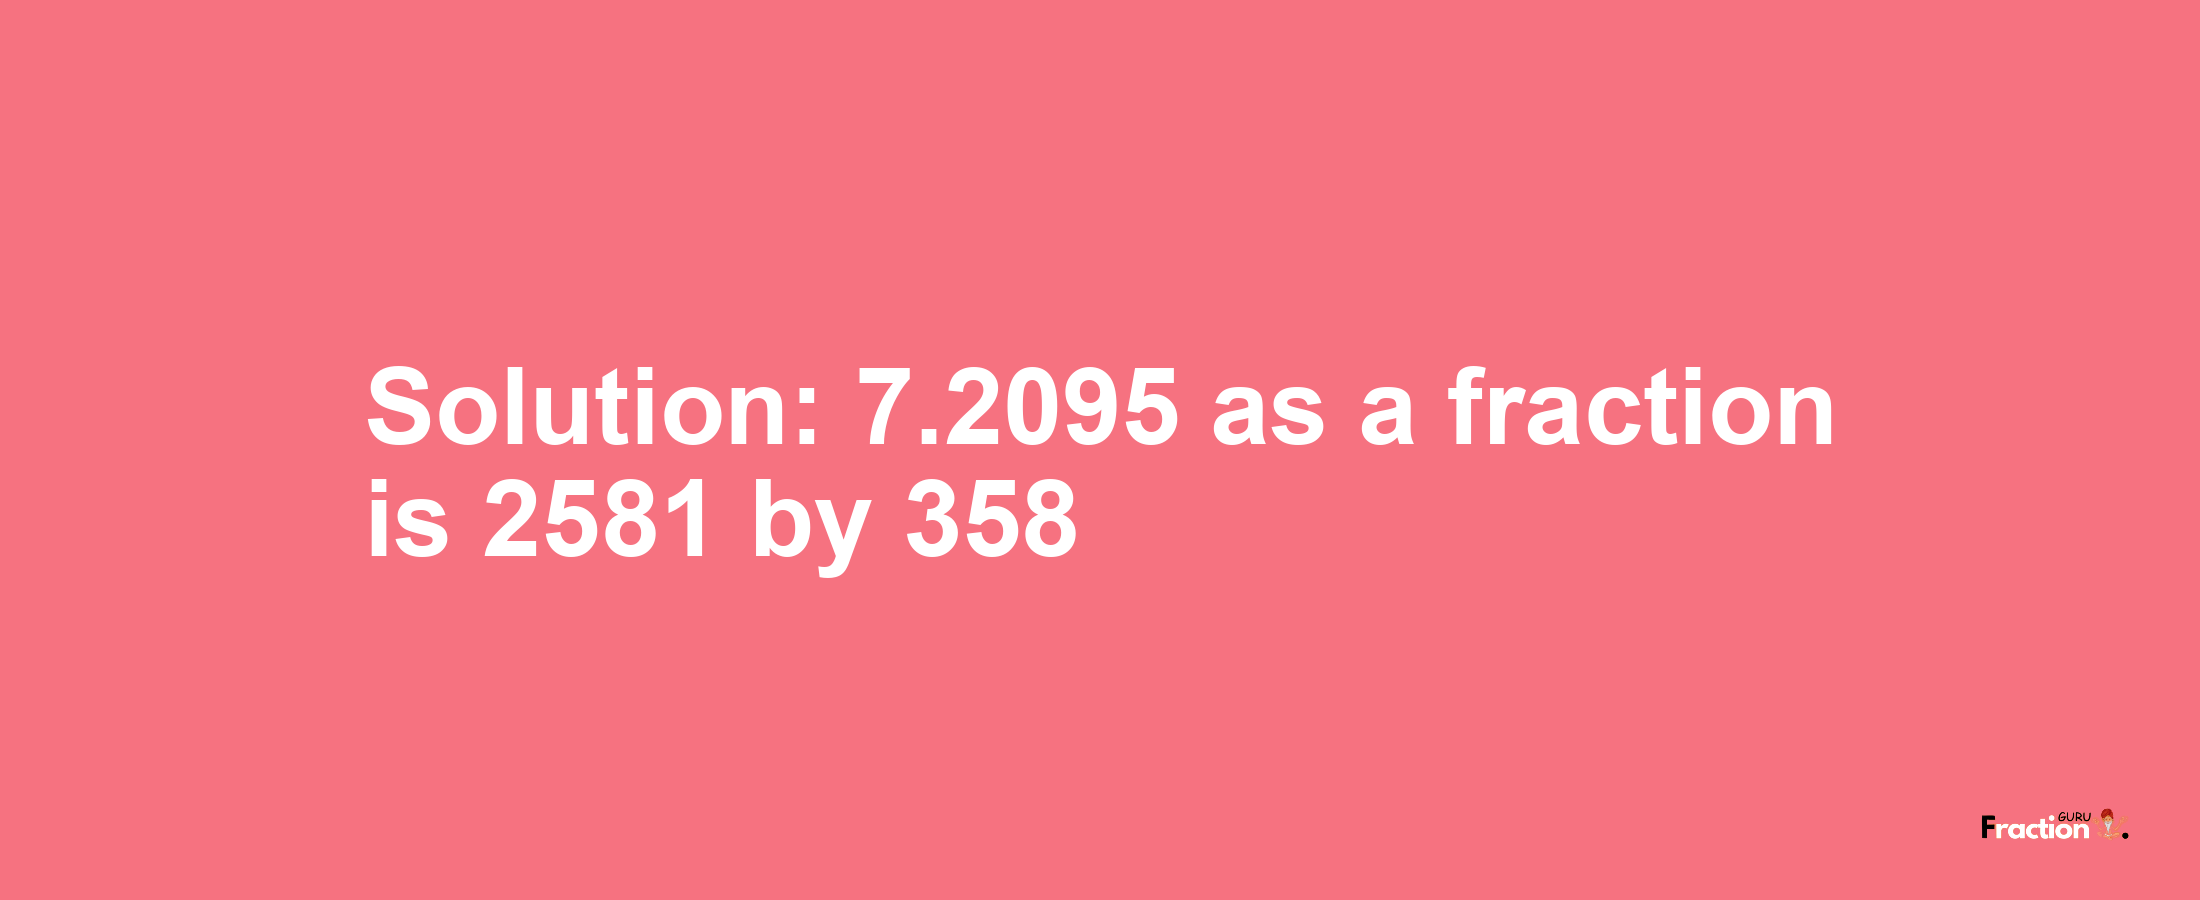 Solution:7.2095 as a fraction is 2581/358